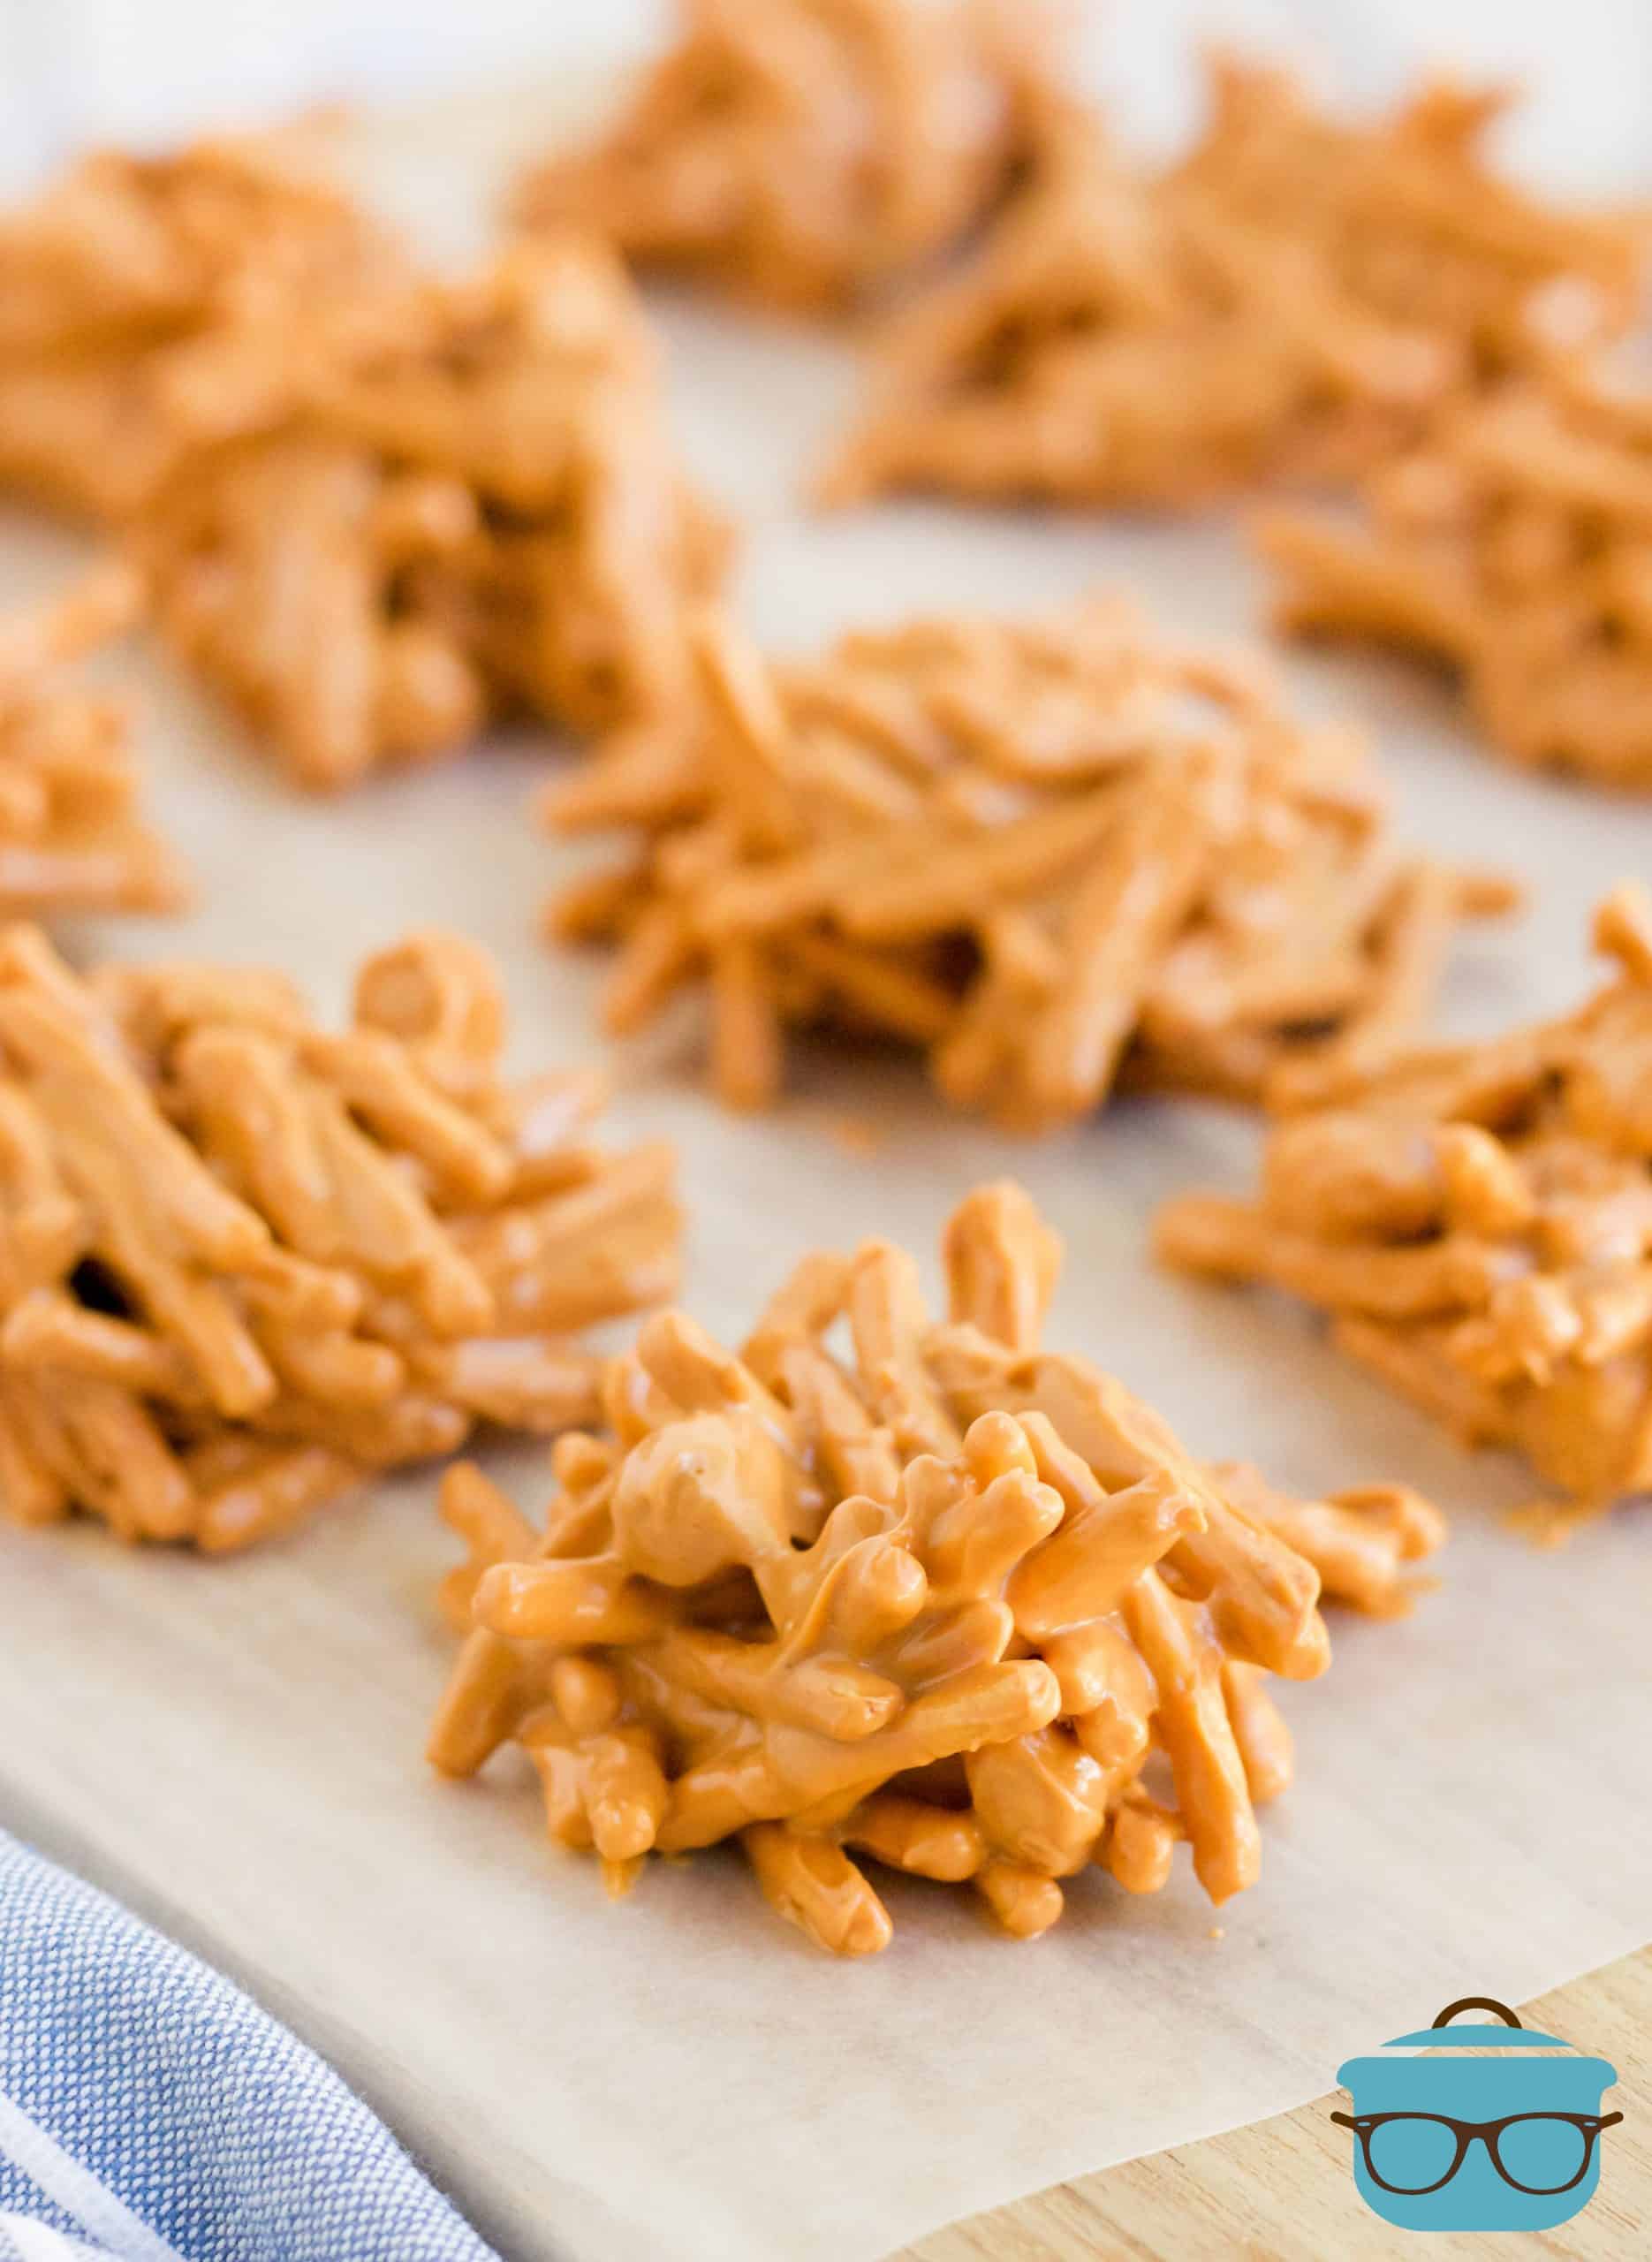 No-Bake butterscotch peanut chow mein candy treats cooling on wax paper that is on a light wood cutting board.